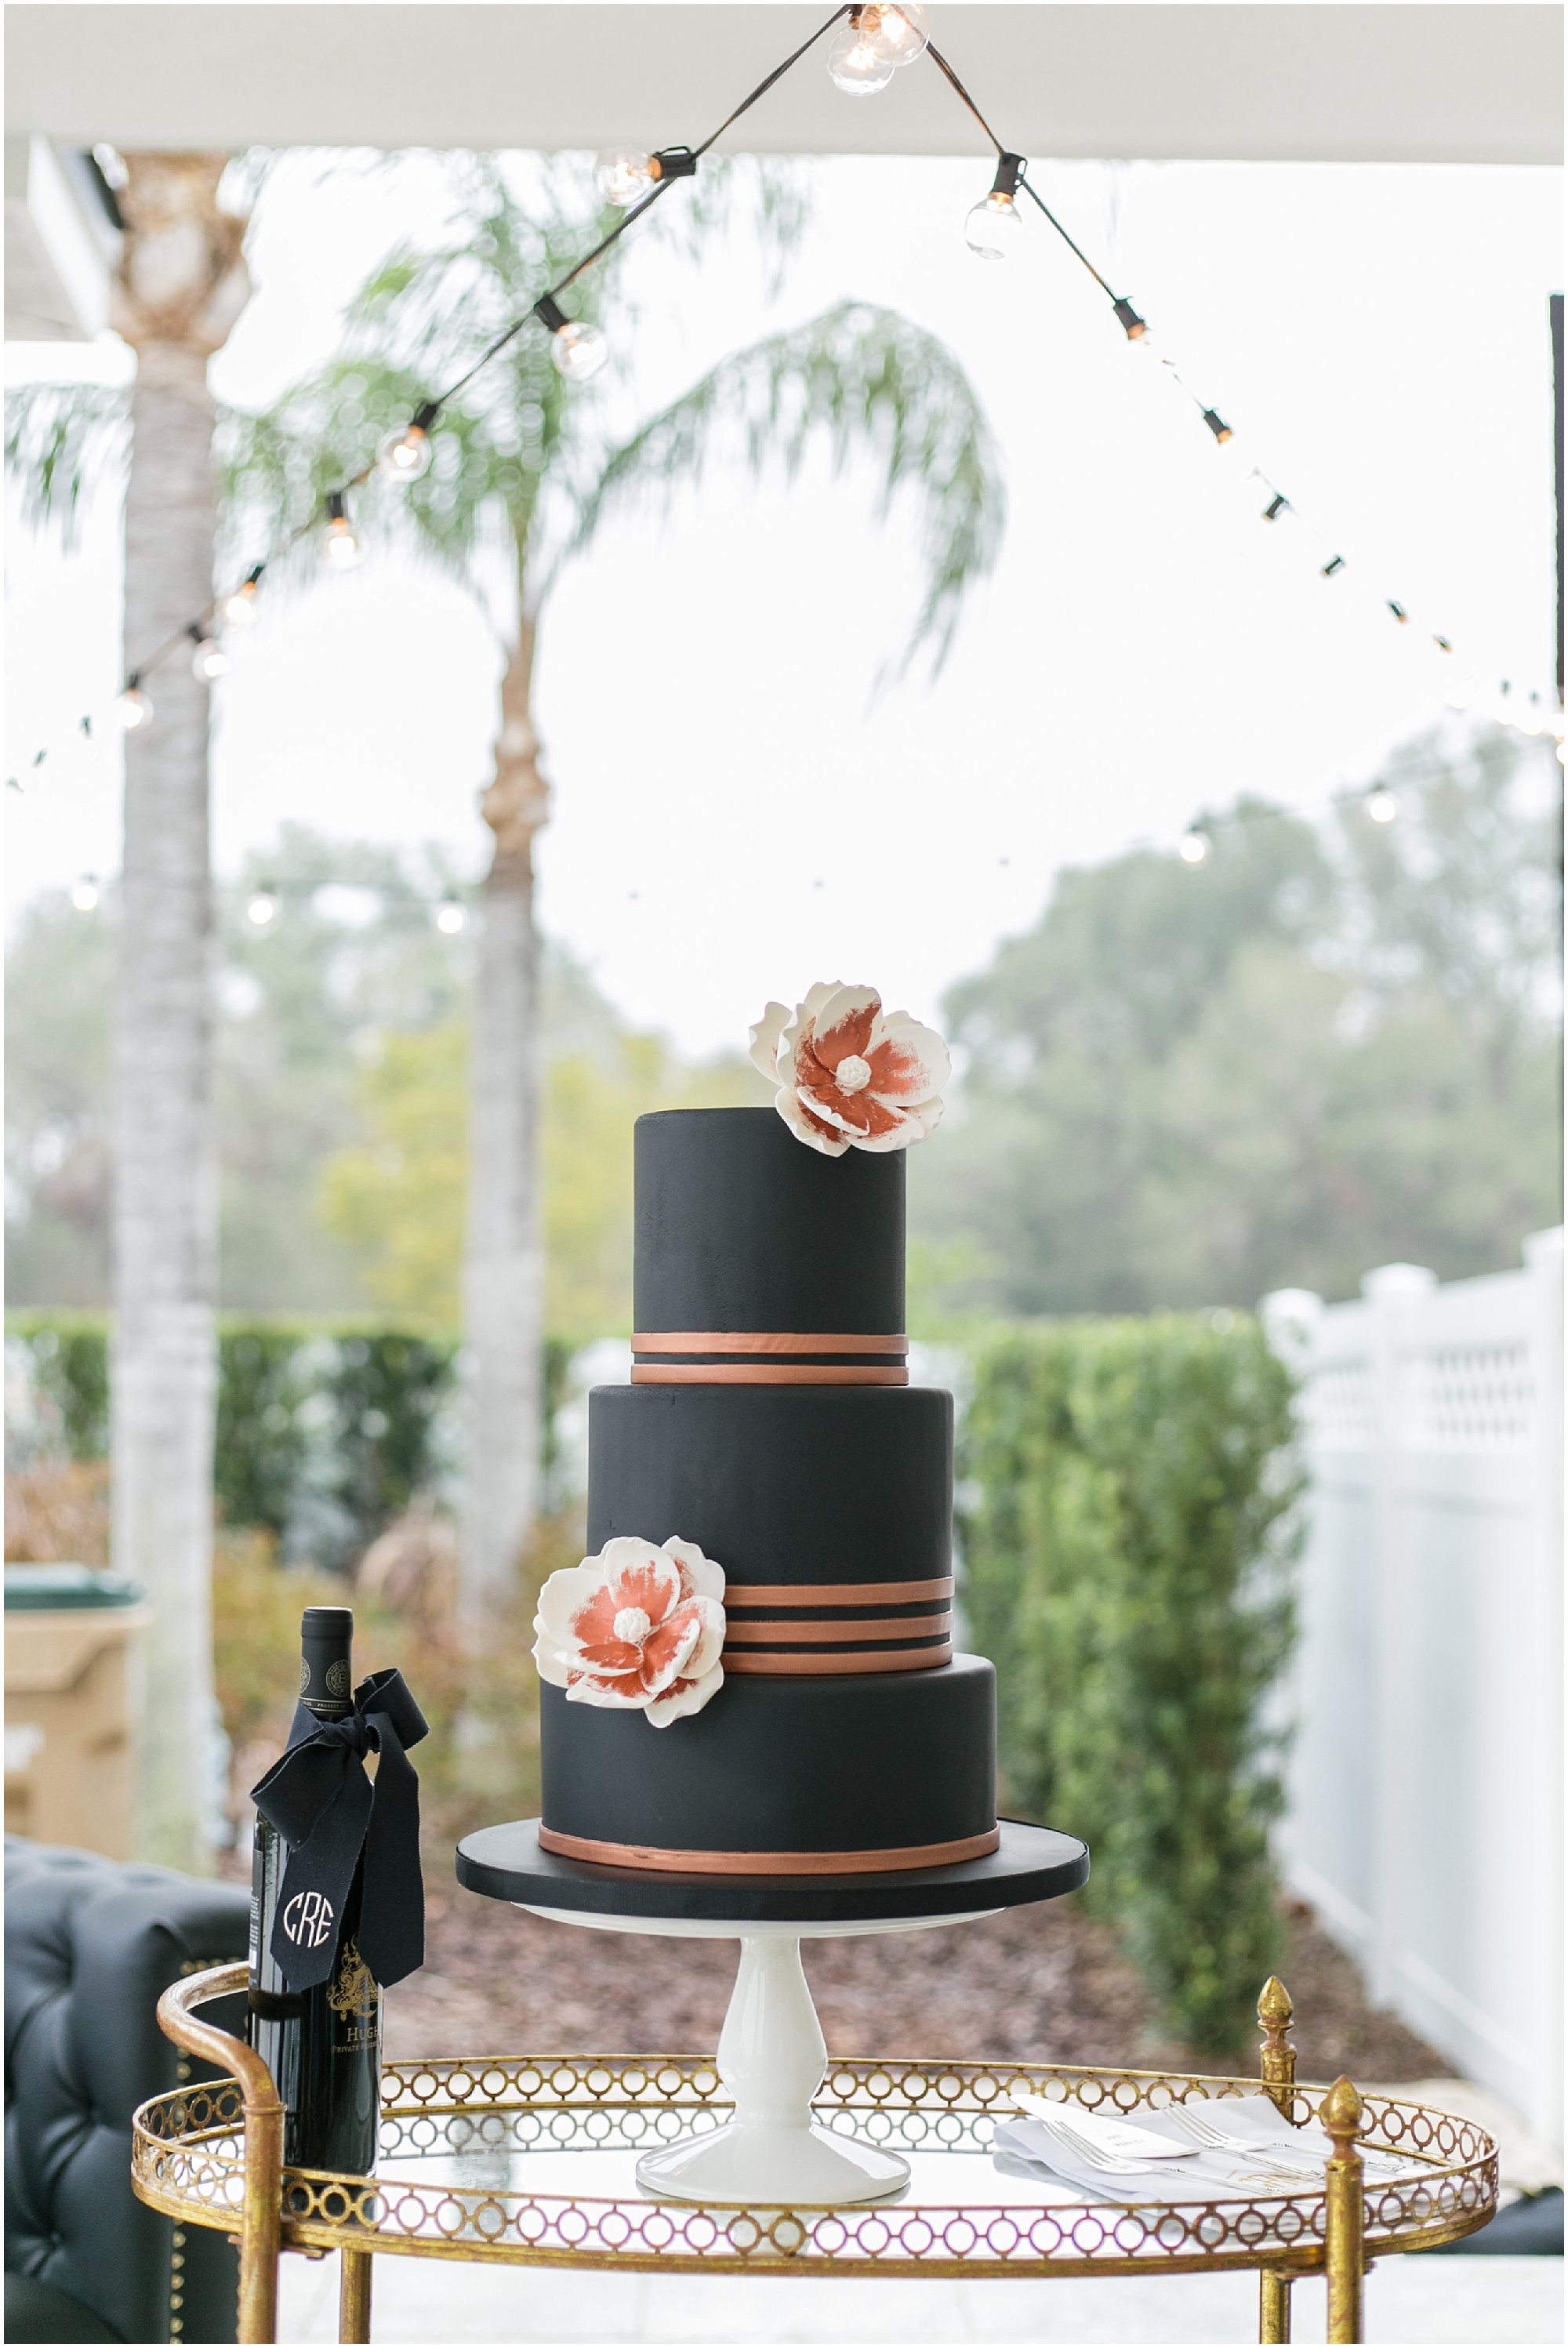 Black, pink and ivory wedding cake on the terrace.